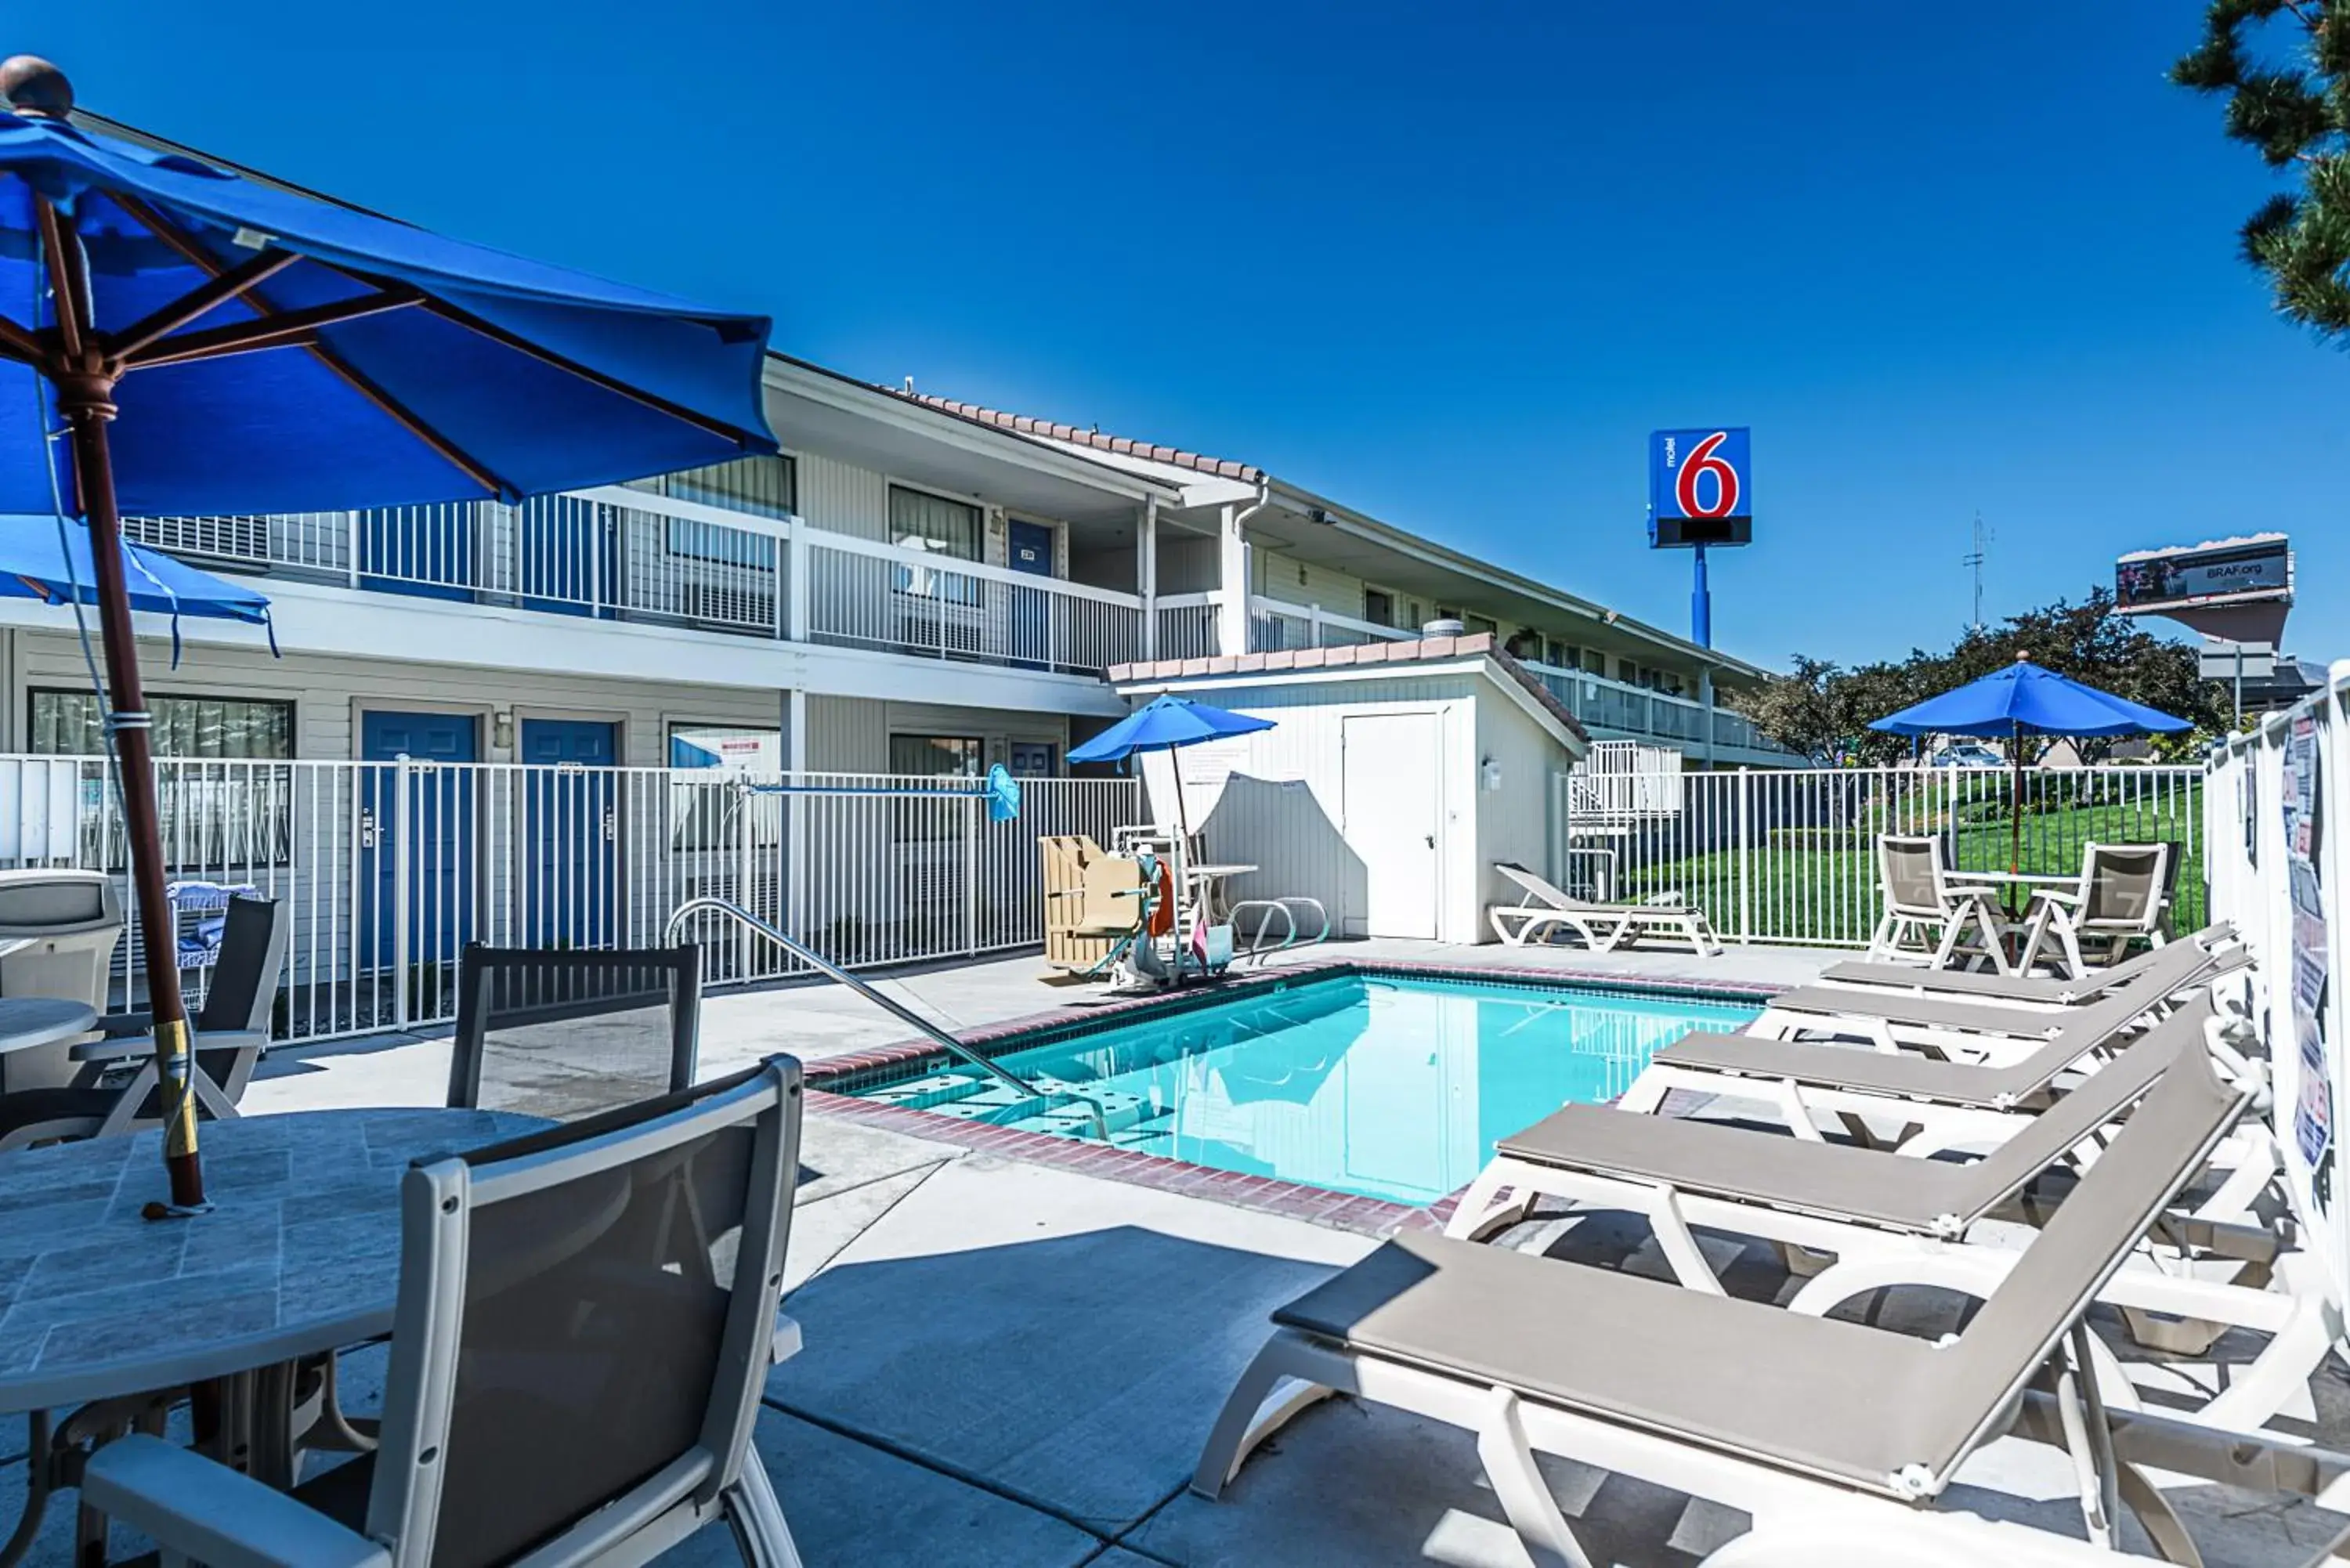 Swimming pool, Property Building in Motel 6-Sparks, NV - Airport - Sparks